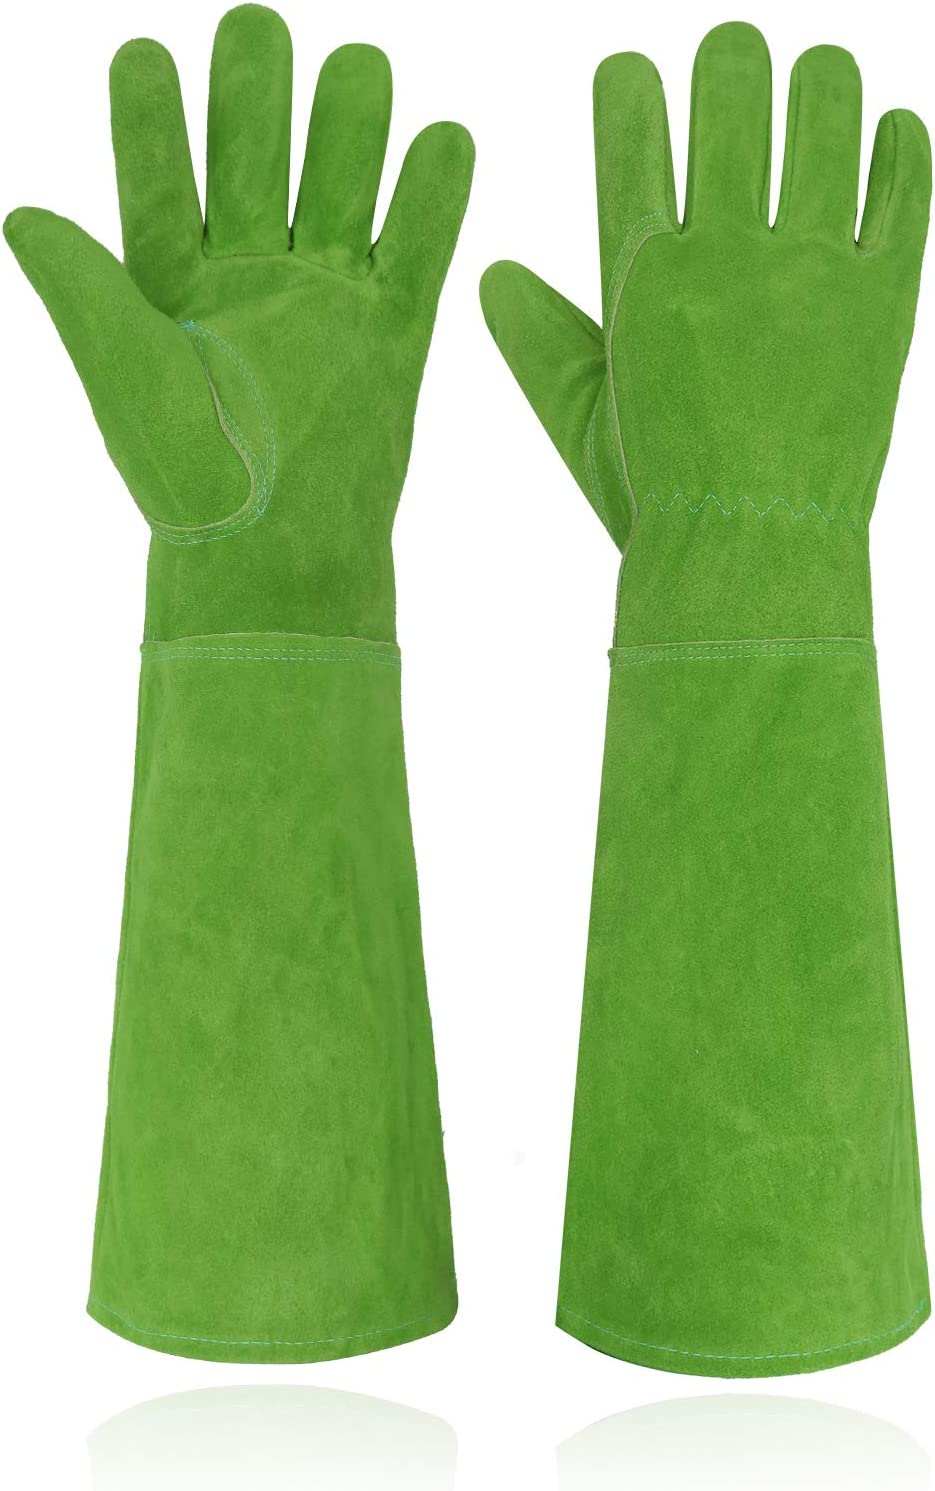 Gardening Gloves For Small Hands